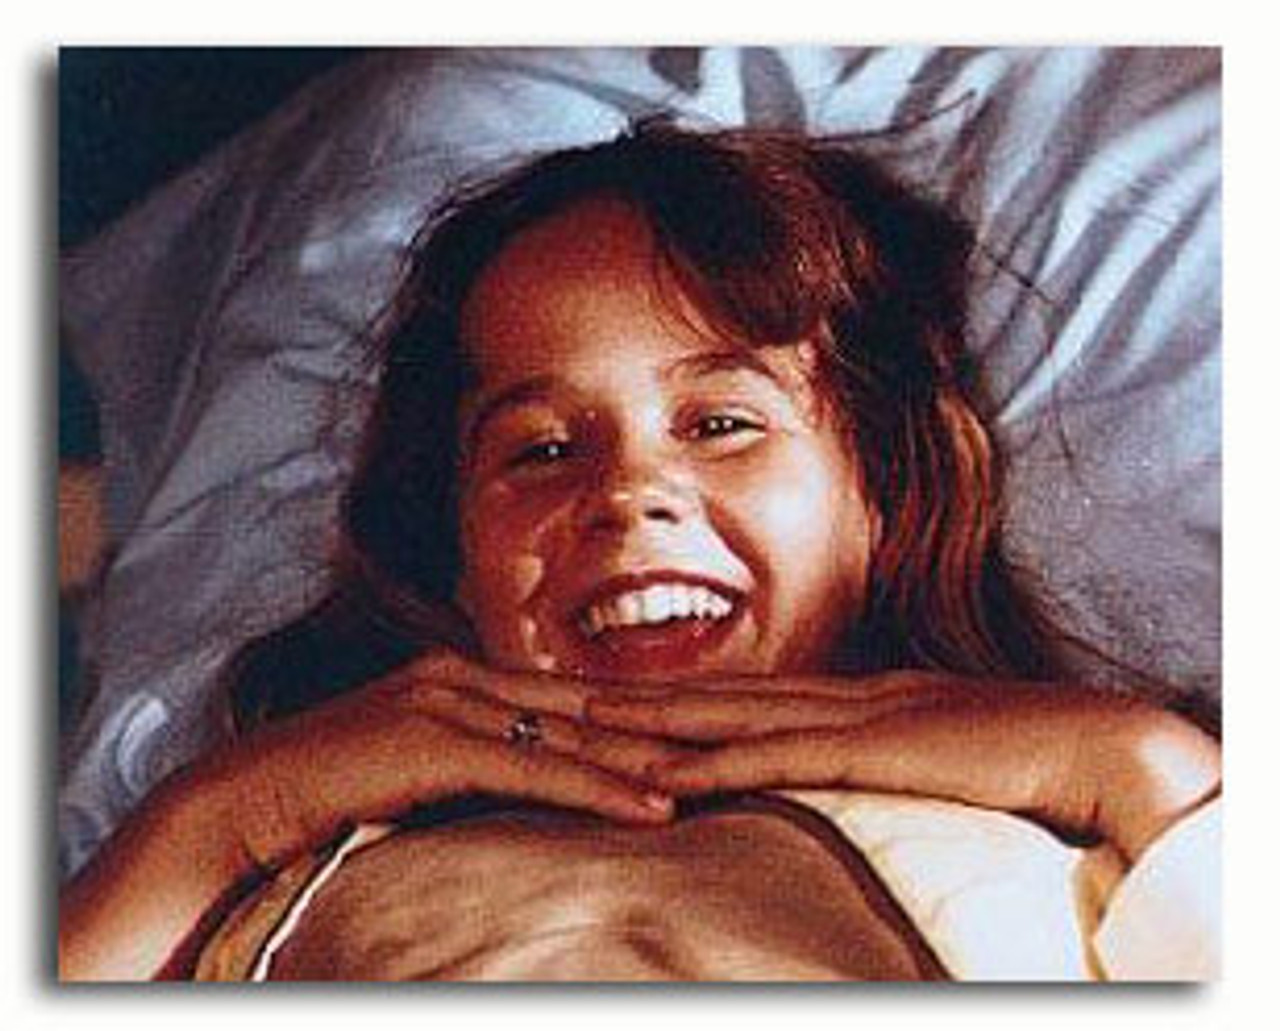 (SS2873104) Movie picture of Linda Blair buy celebrity photos and posters at Starstills.com